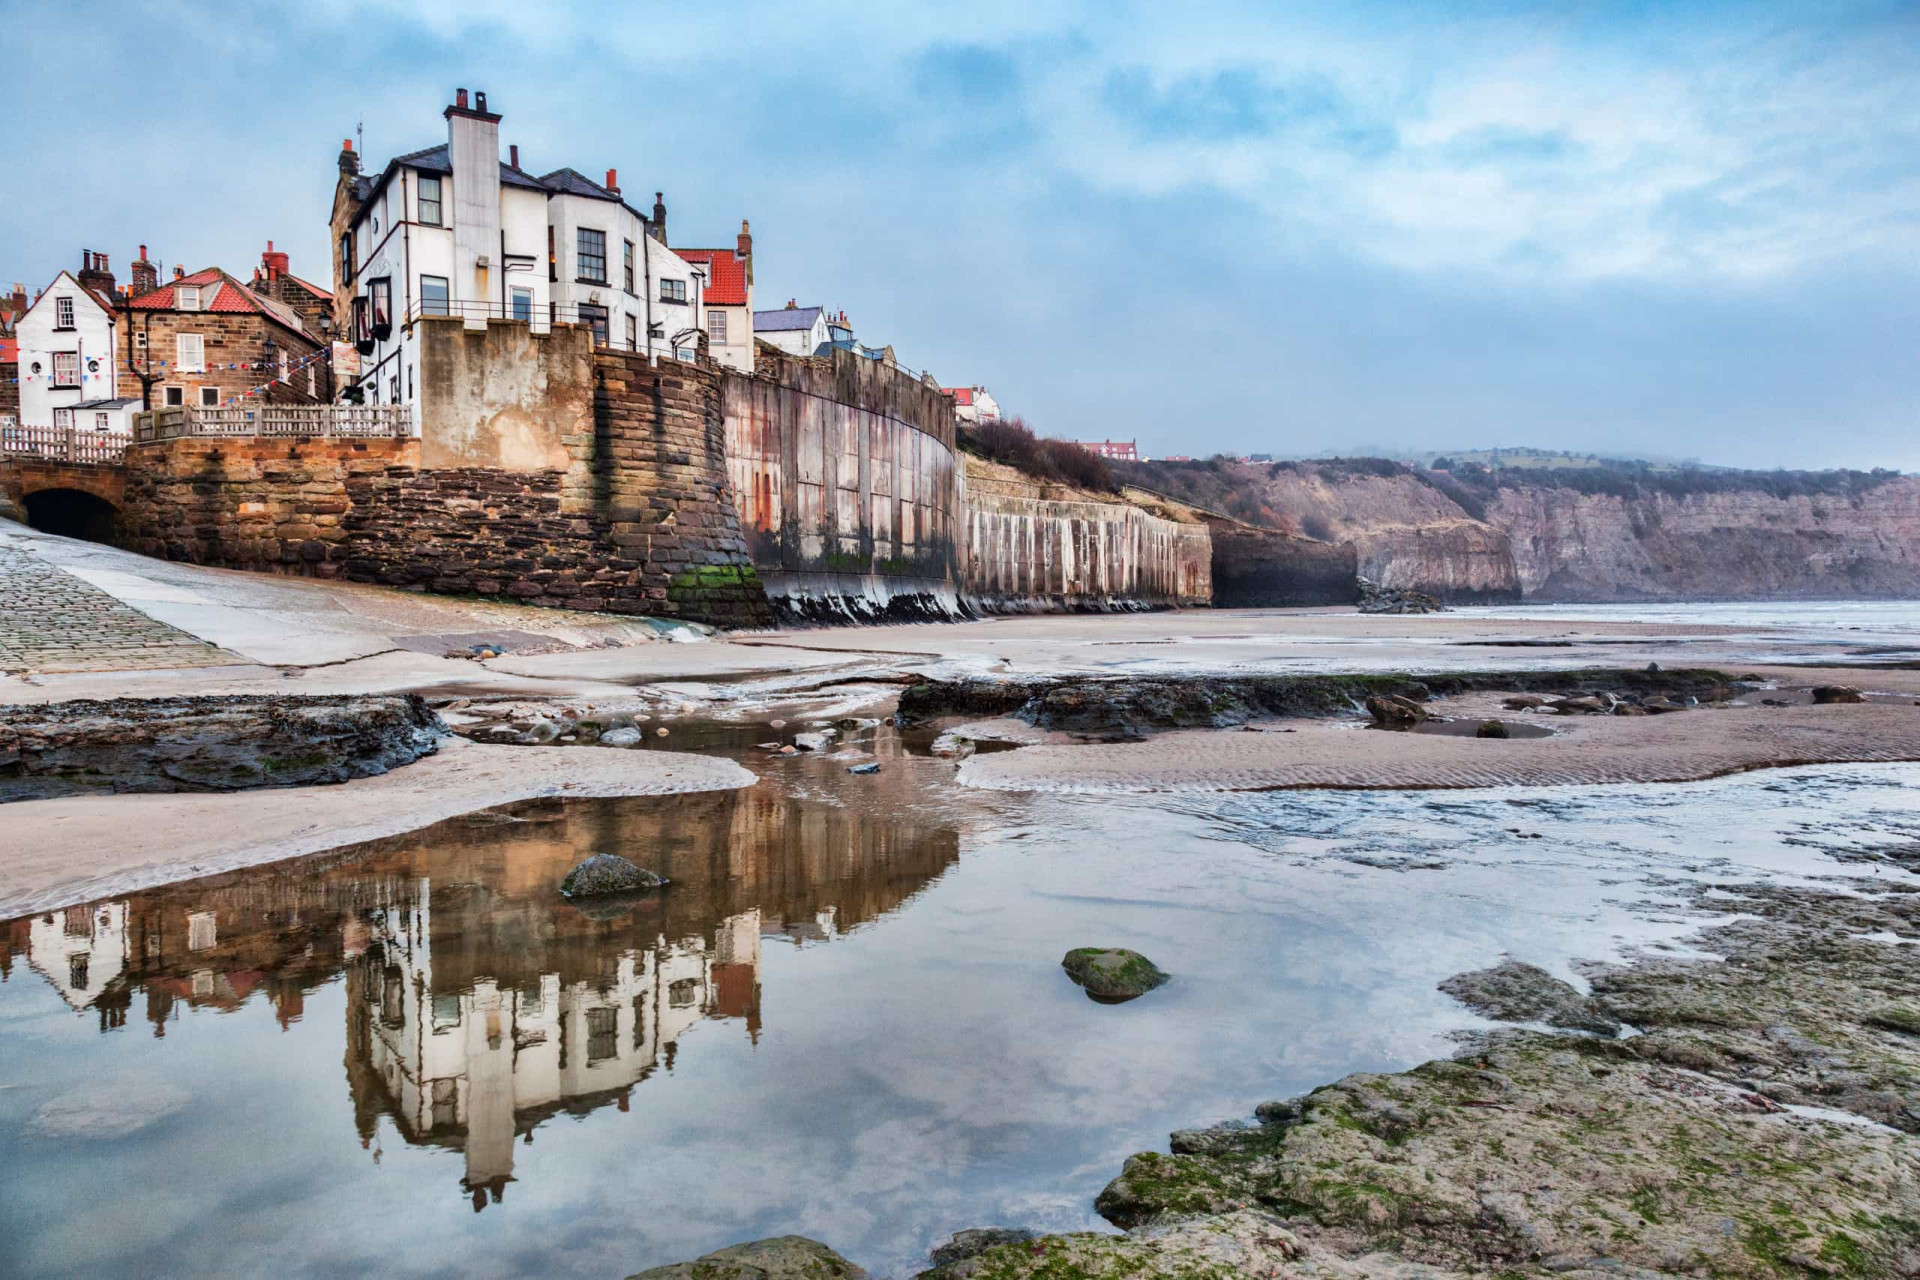 <p>As the name would suggest, Robin Hood's Bay in Whitby is where smugglers used to come in from the sea. There are tunnels going underneath the town where the thieves used to transport brandy, whisky, and other contraband. It has a fantastic history and a very charming appearance to boot.</p>